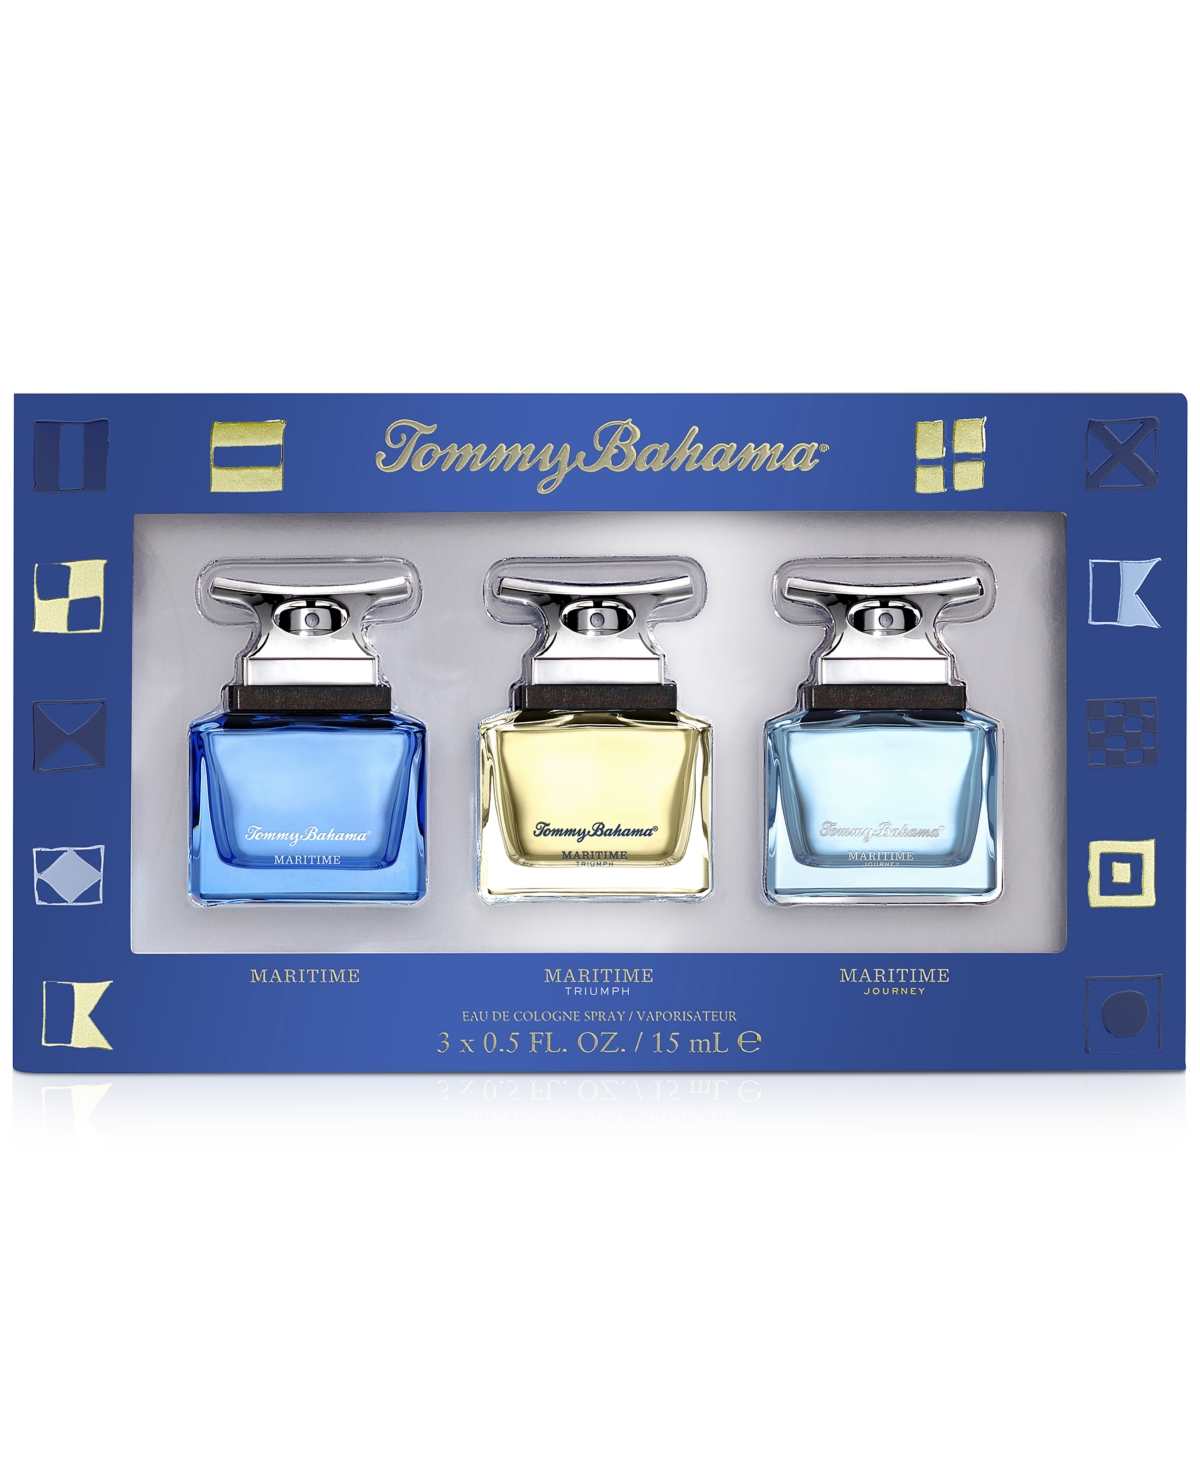 Tommy Bahama Maritime Journey Cologne